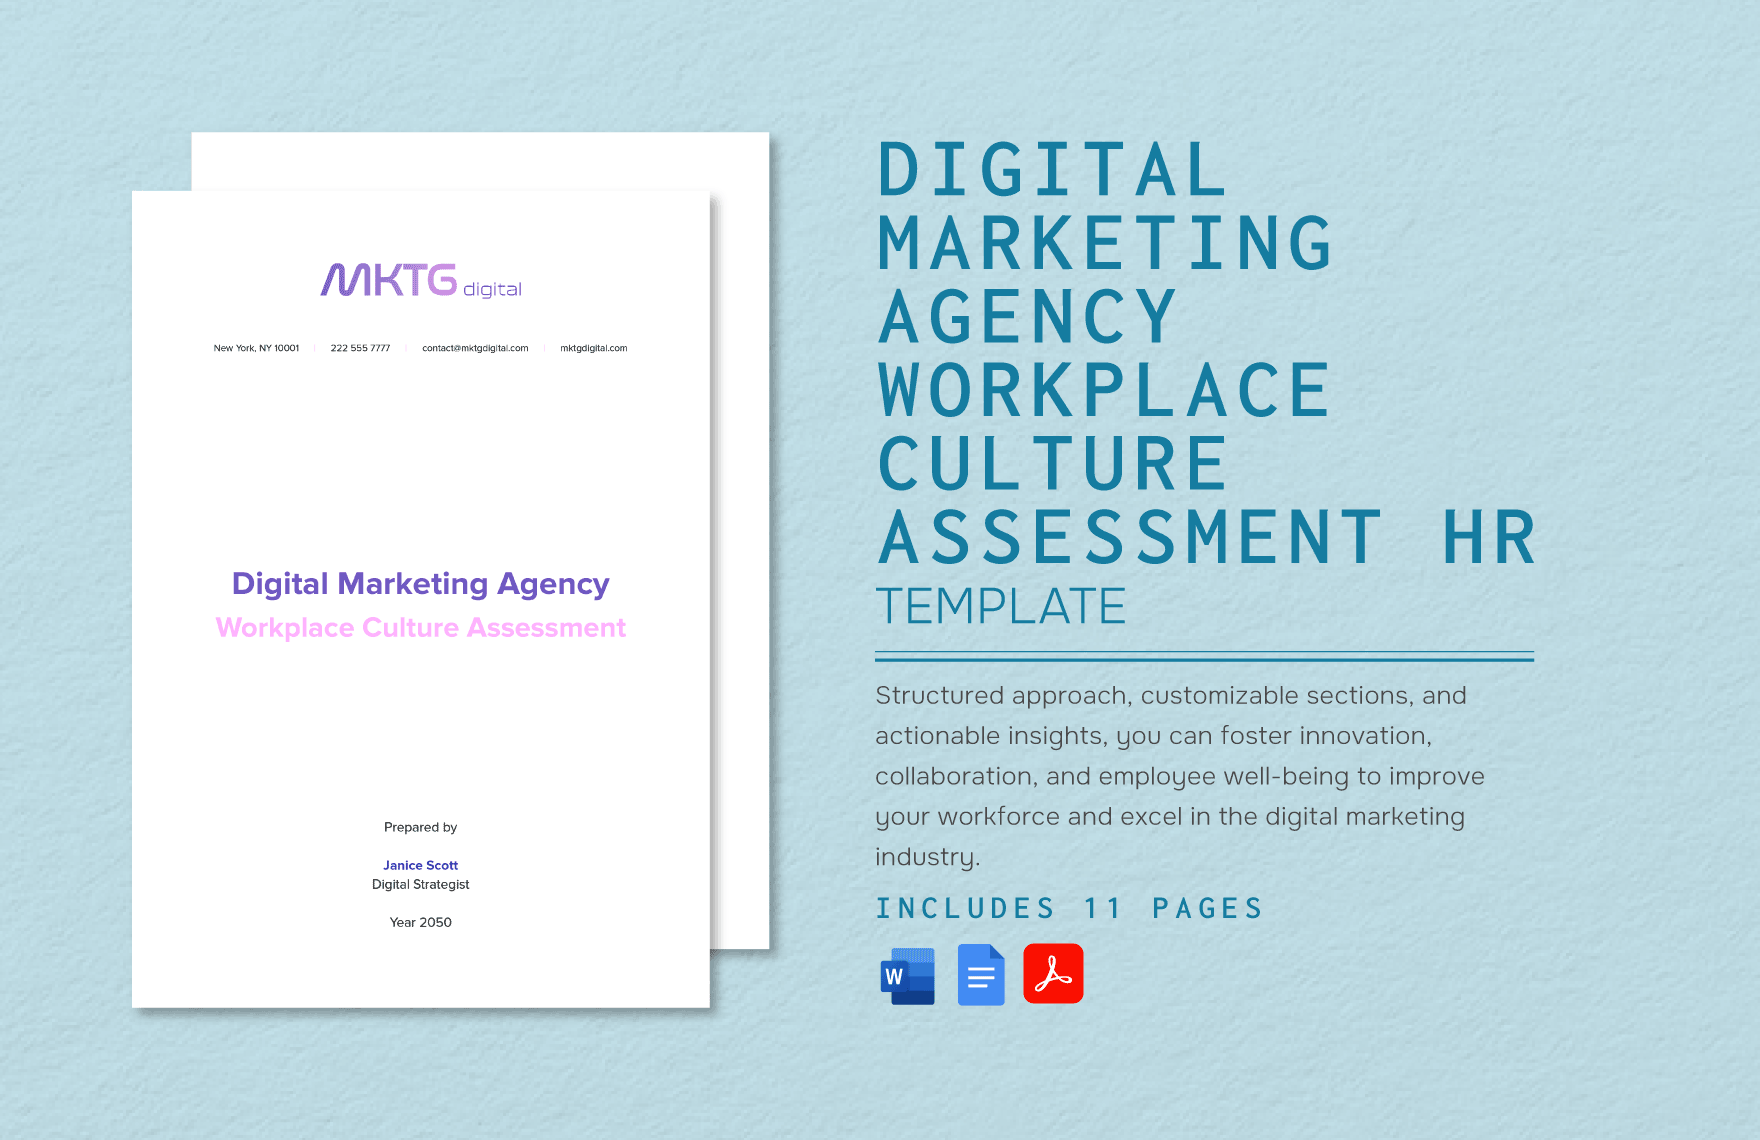 Digital Marketing Agency Workplace Culture Assessment HR Template